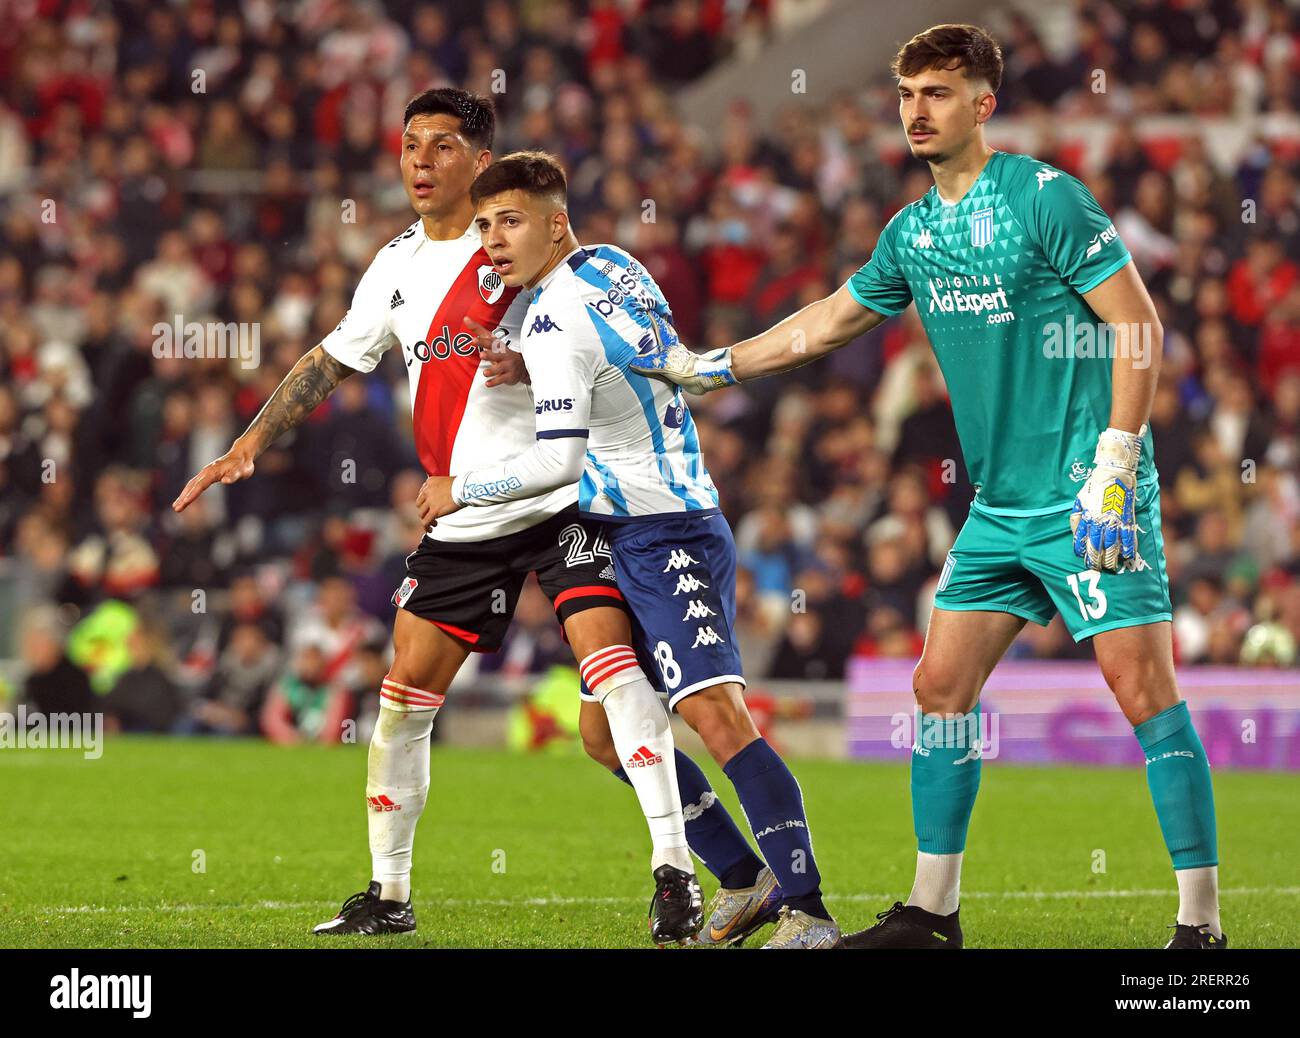 River Plate's midfielder Enzo Perez (L) waits for the ball next Racing Club's defender Tobias Rubio (C) and goalkeeper Matias Tagliamonte during the Argentine Professional Football League Tournament 2023 match at El Monumental stadium, in Buenos Aires, on July 28, 2023.  (Photo by Alejandro Pagni / PHOTOxPHOTO) Stock Photo